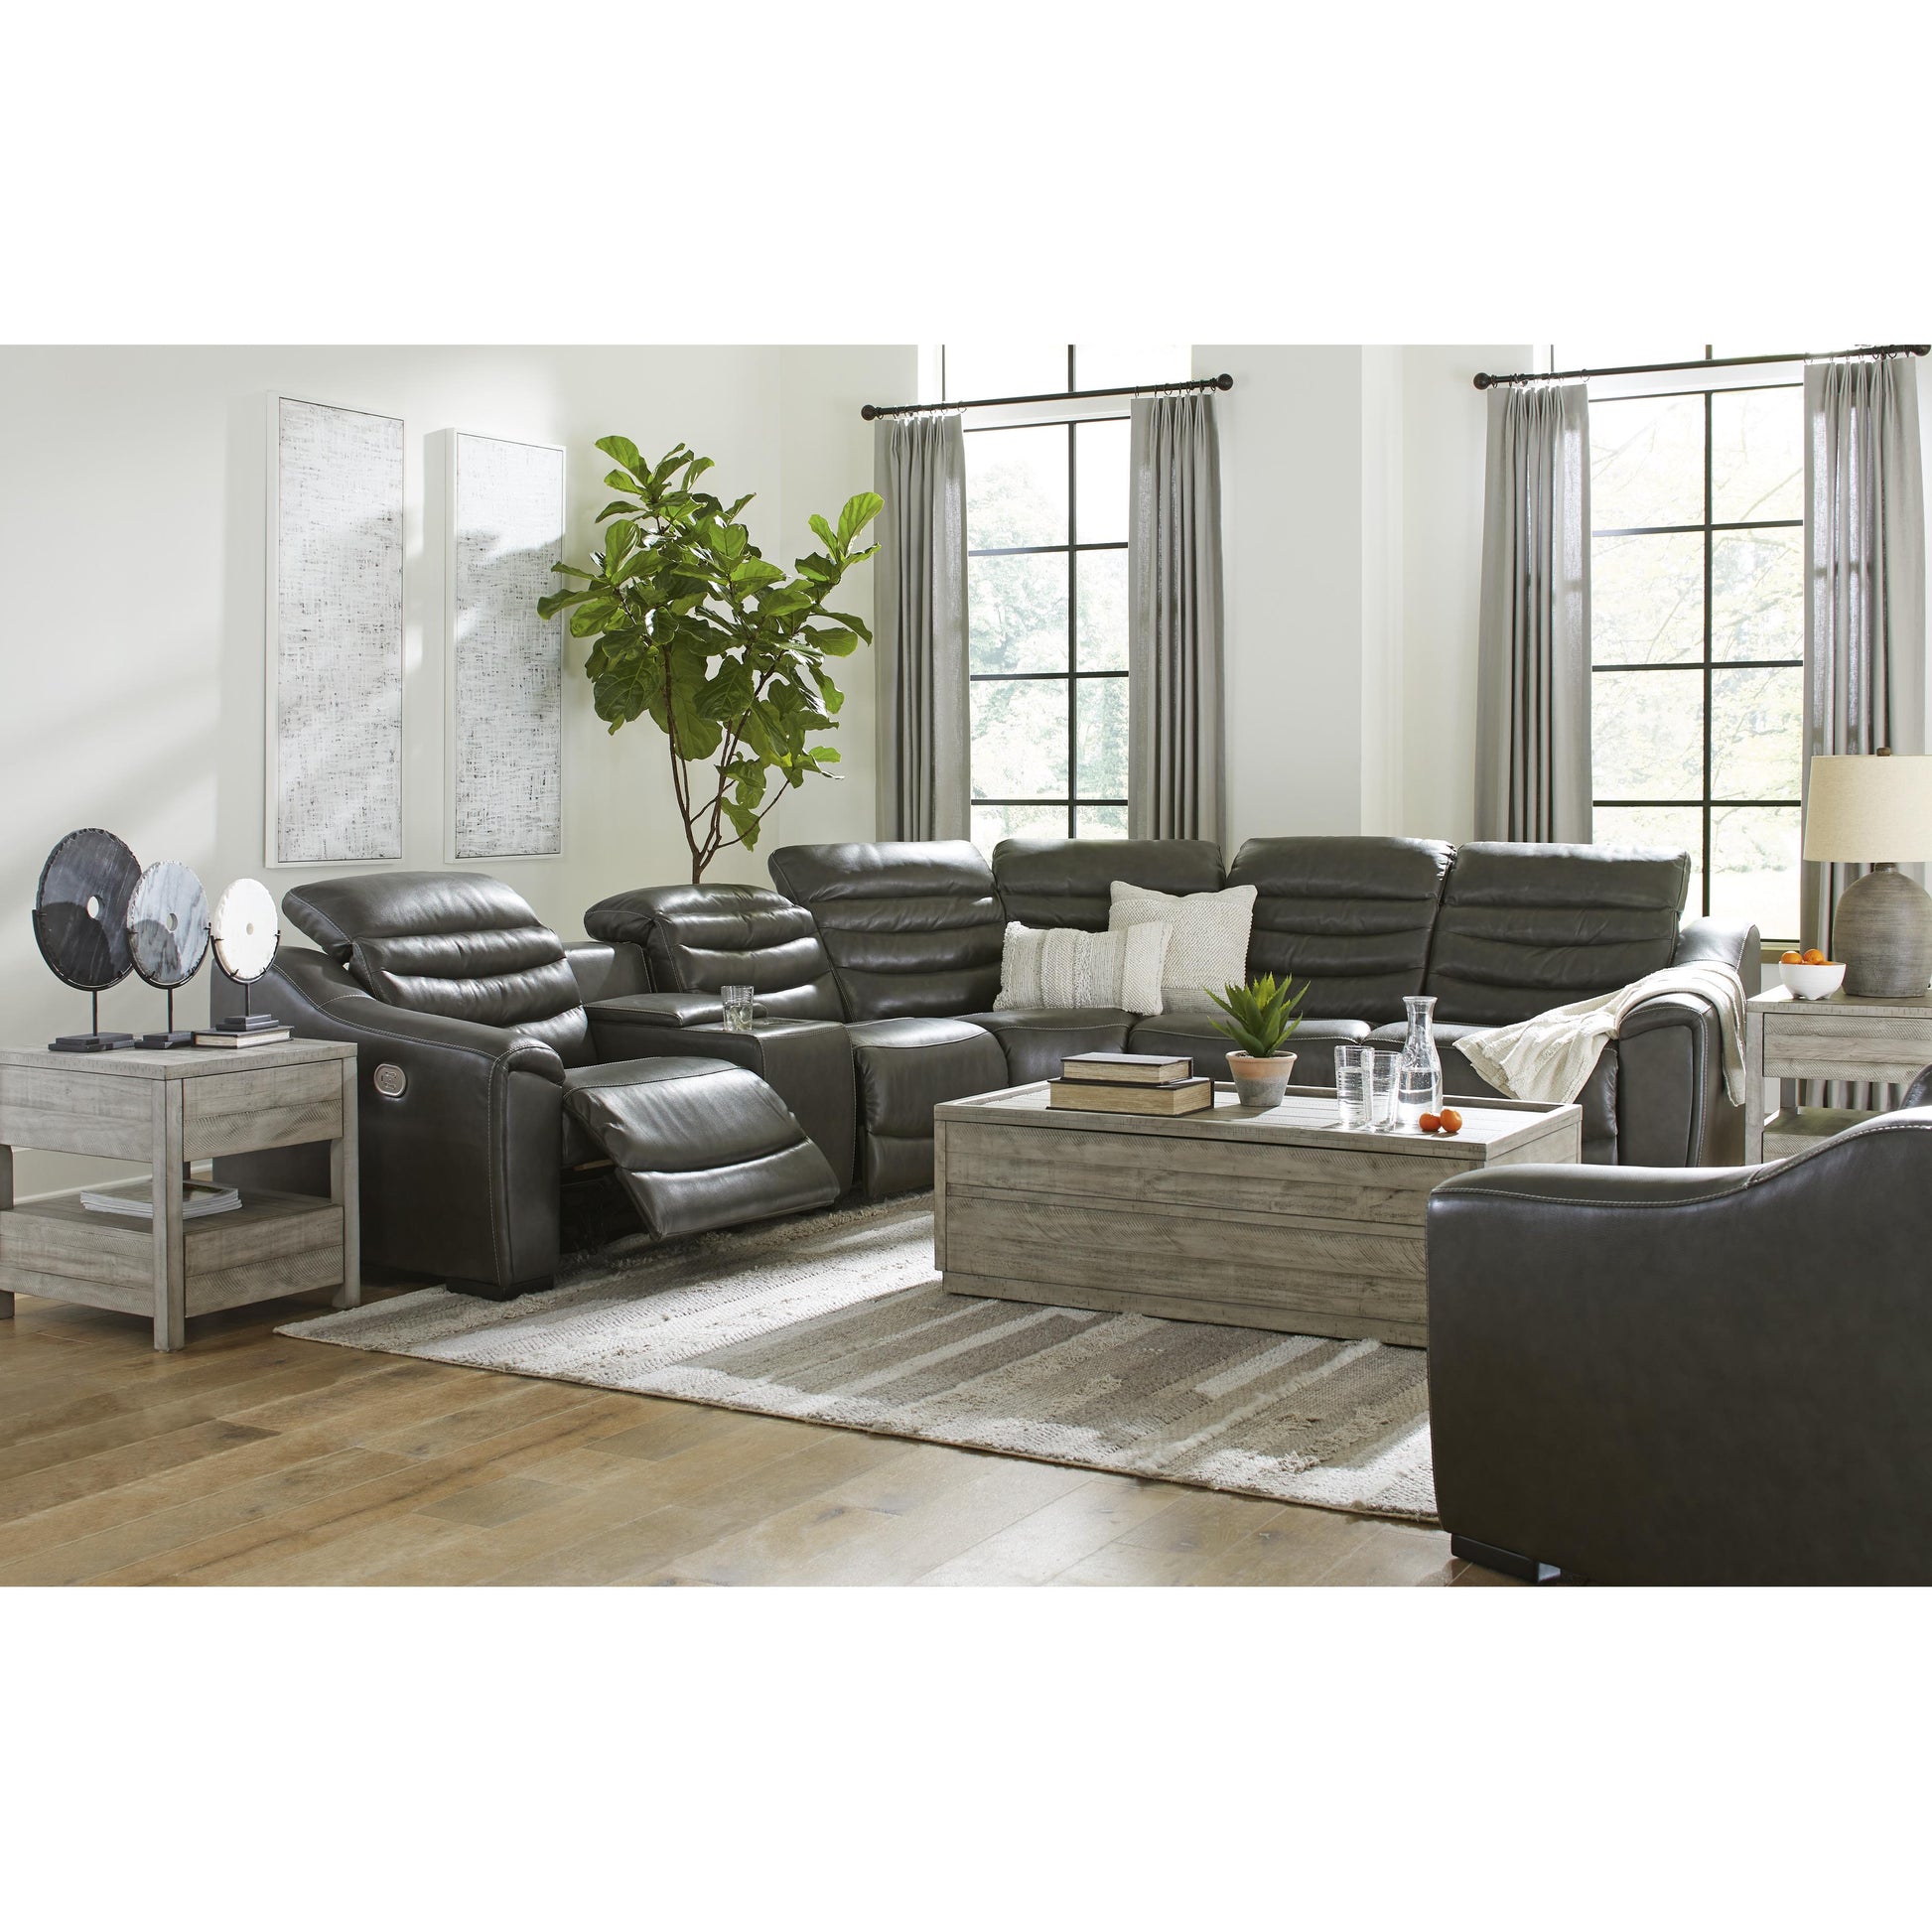 Signature Design by Ashley Center Line Power Leather Match Recliner U6340413 IMAGE 9